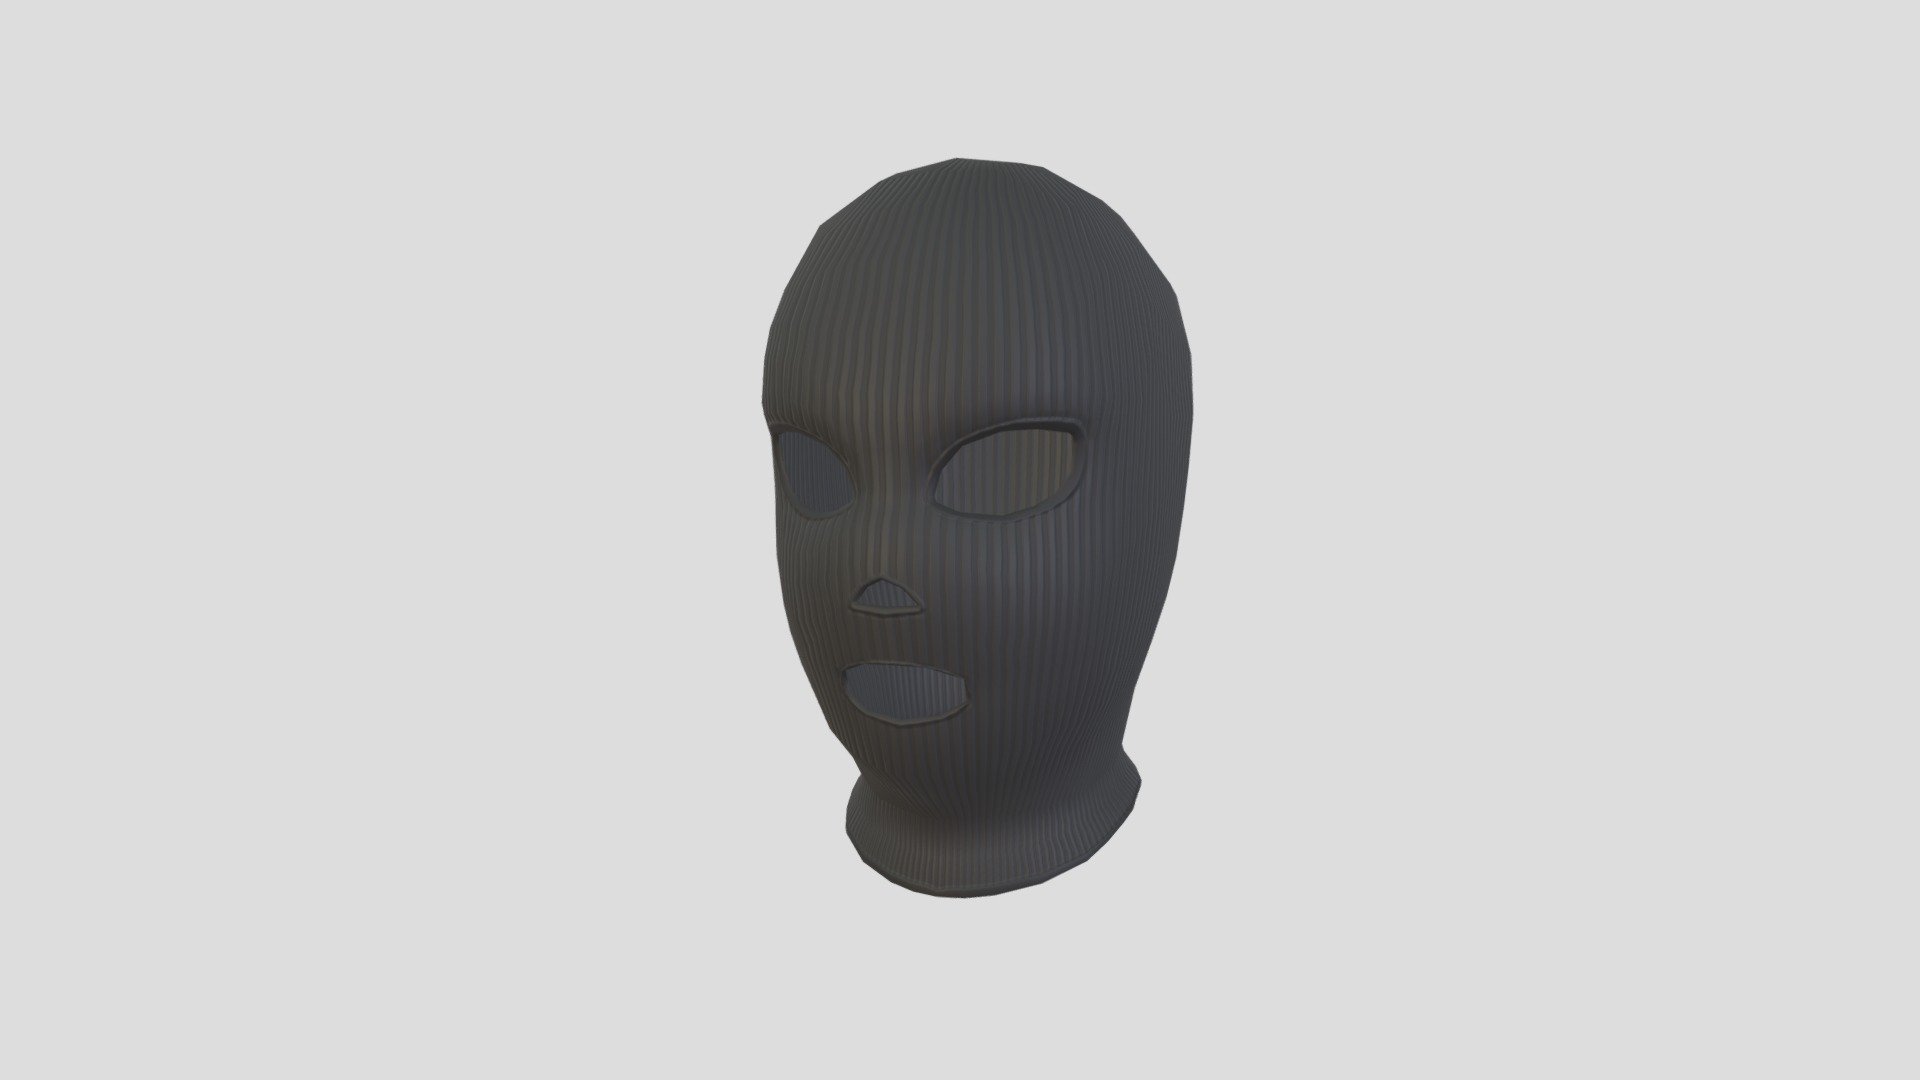 Robber Mask          

3d model.          


Ready for your Game, App, Animation, etc.          

File Format:          

-3ds Max 2022          

-FBX          

-OBJ          
   


PNG texture               

2048 x 2048                


- Diffuse                        

- Normal Map                            

- Roughness                         



Completely UVunwrapped.          

Non-overlapping.          


Clean topology 3d model